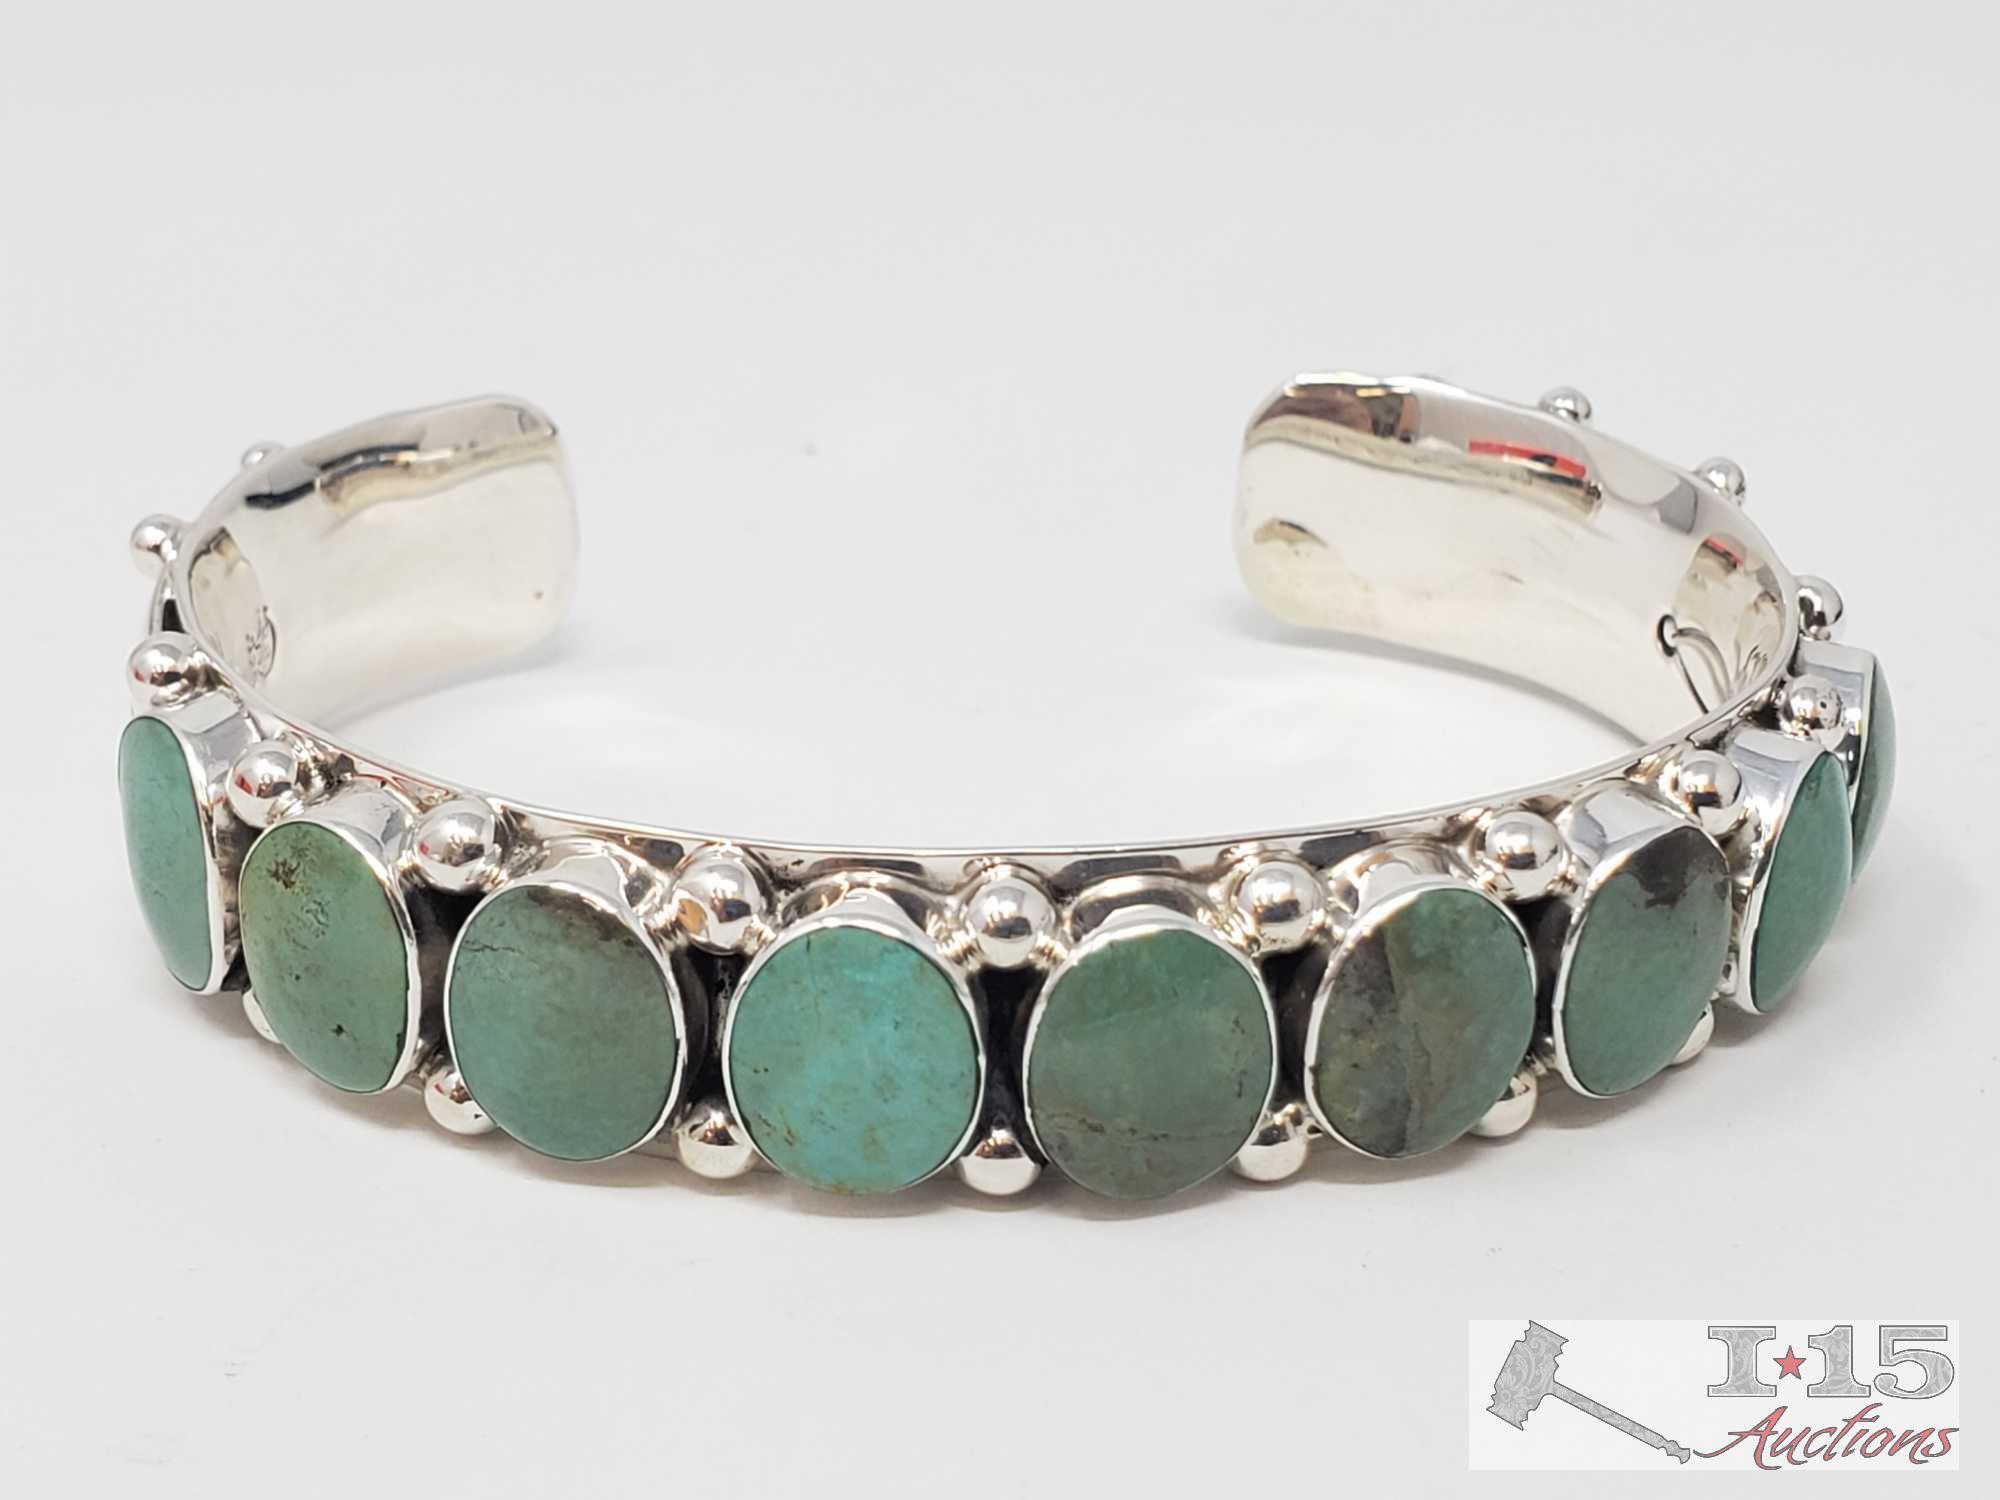 Beautiful Sterling Silver and Green Turquoise Native American Bracelet...Cuff 40.3g